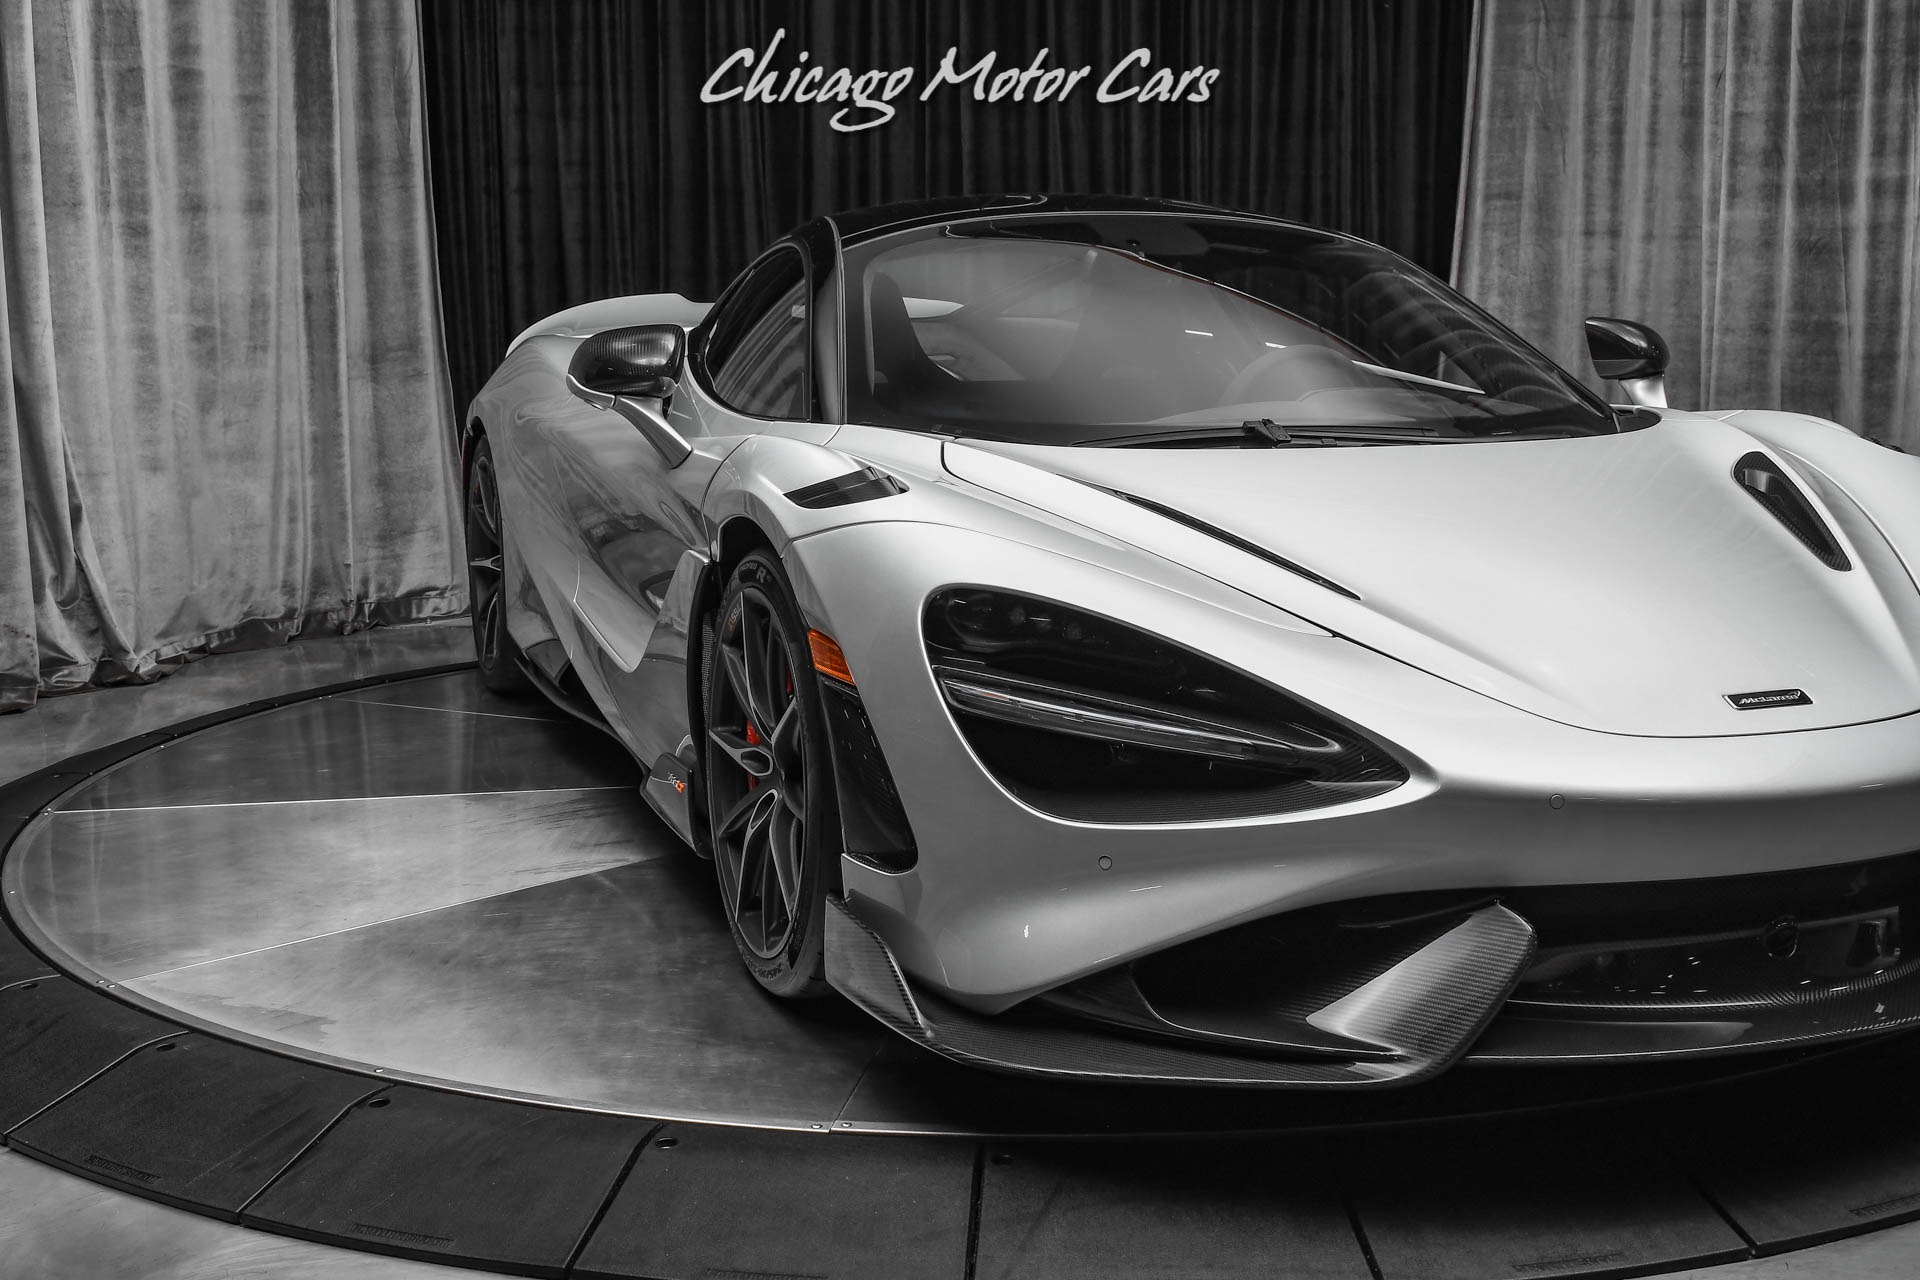 Used-2021-McLaren-765LT-Coupe-Silver--617-of-765-ONLY-1K-Miles-Hot-Spec-TONS-of-Carbon-RARE